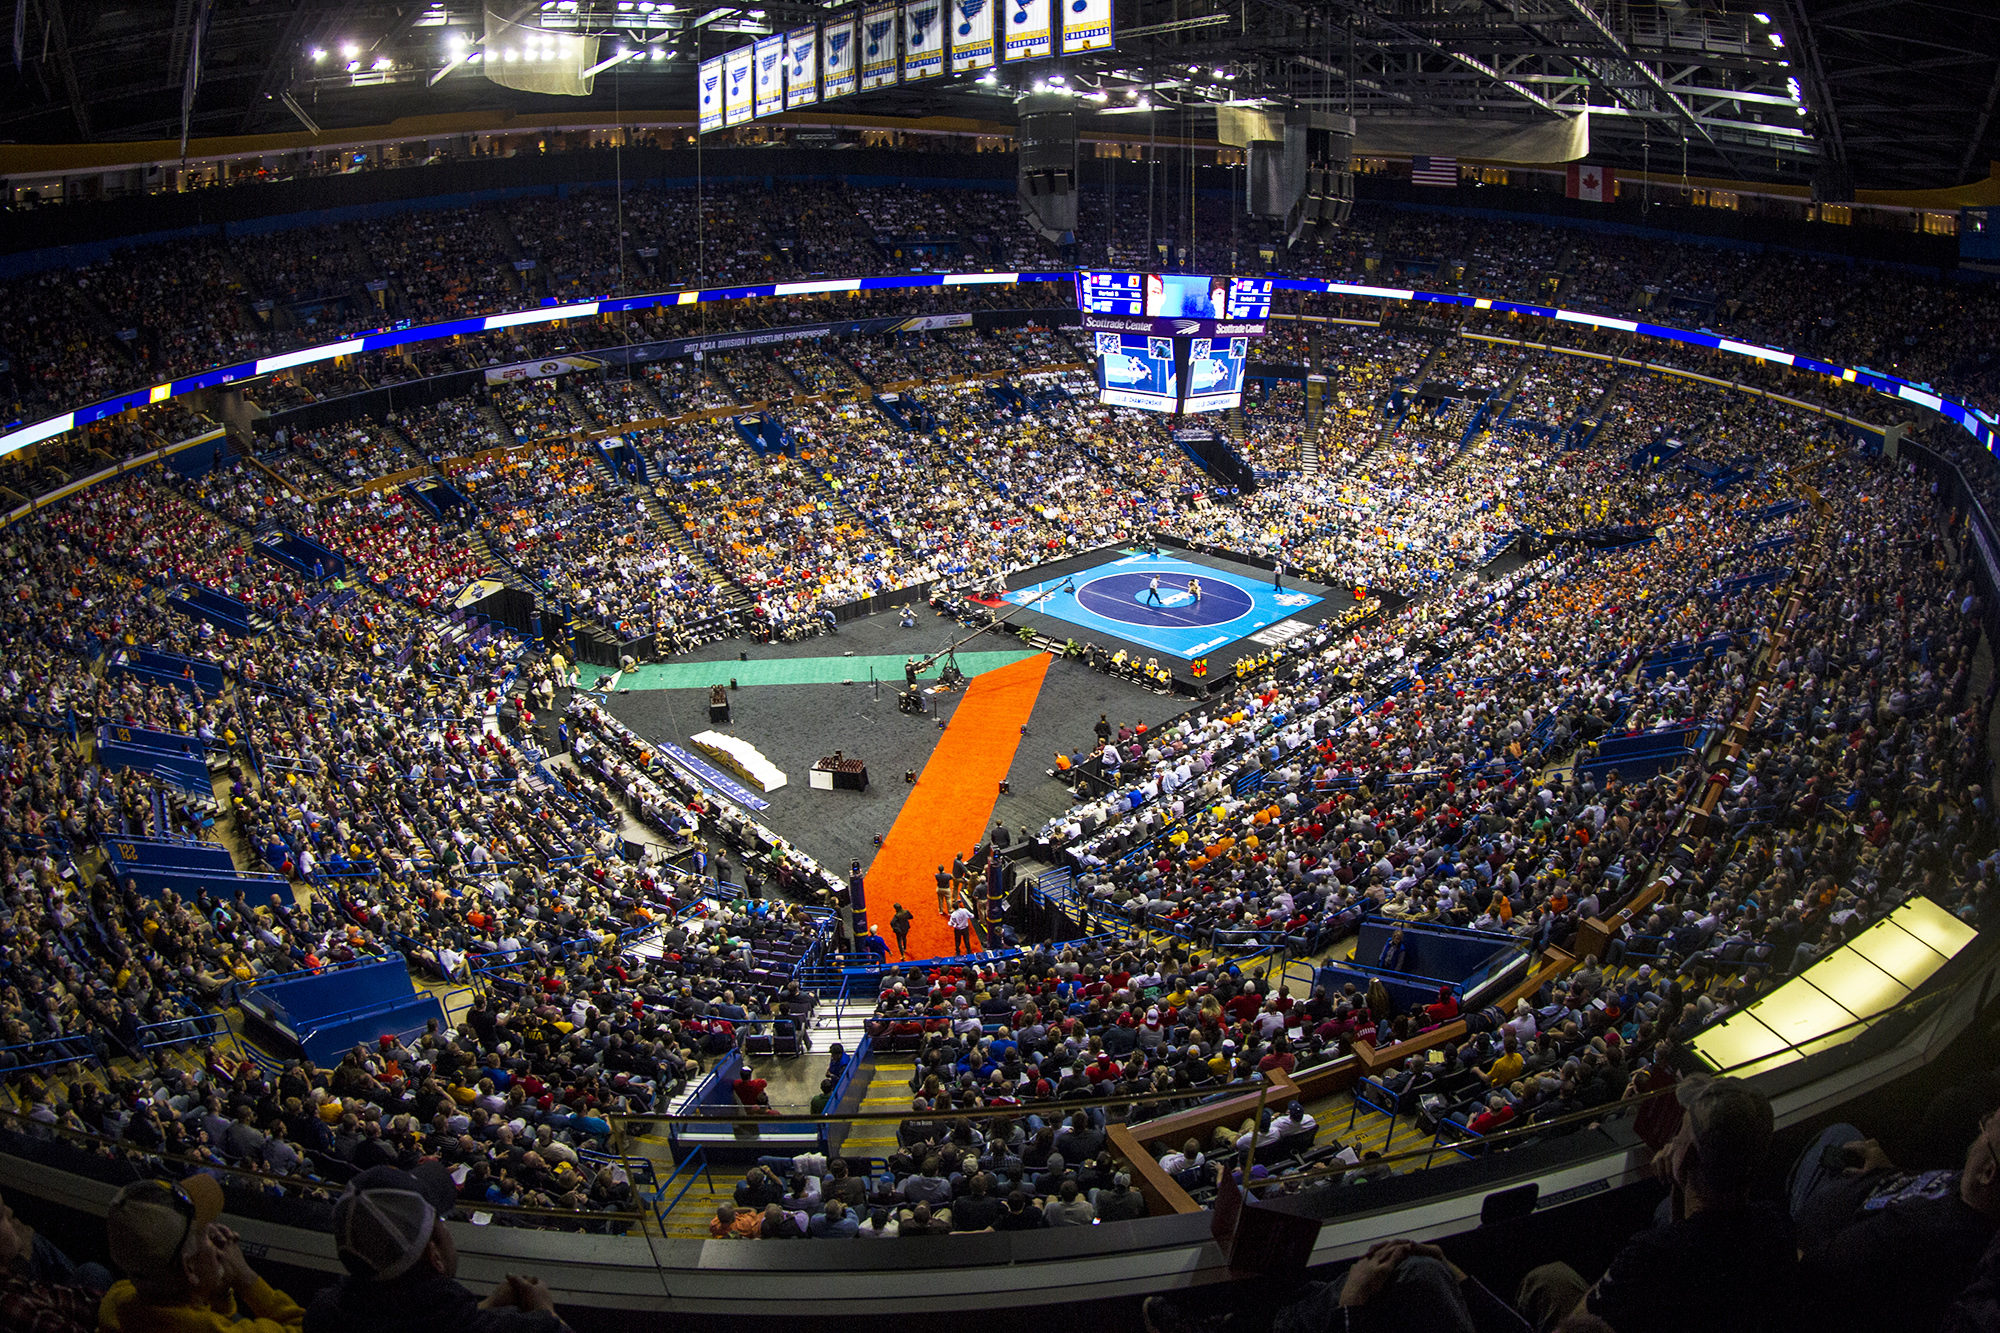 ST. LOUIS TO HOST NCAA DI WRESTLING CHAMPIONSHIPS THIS WEEK AT ENTERPRISE CENTER FOR NINTH TIME SINCE 2000